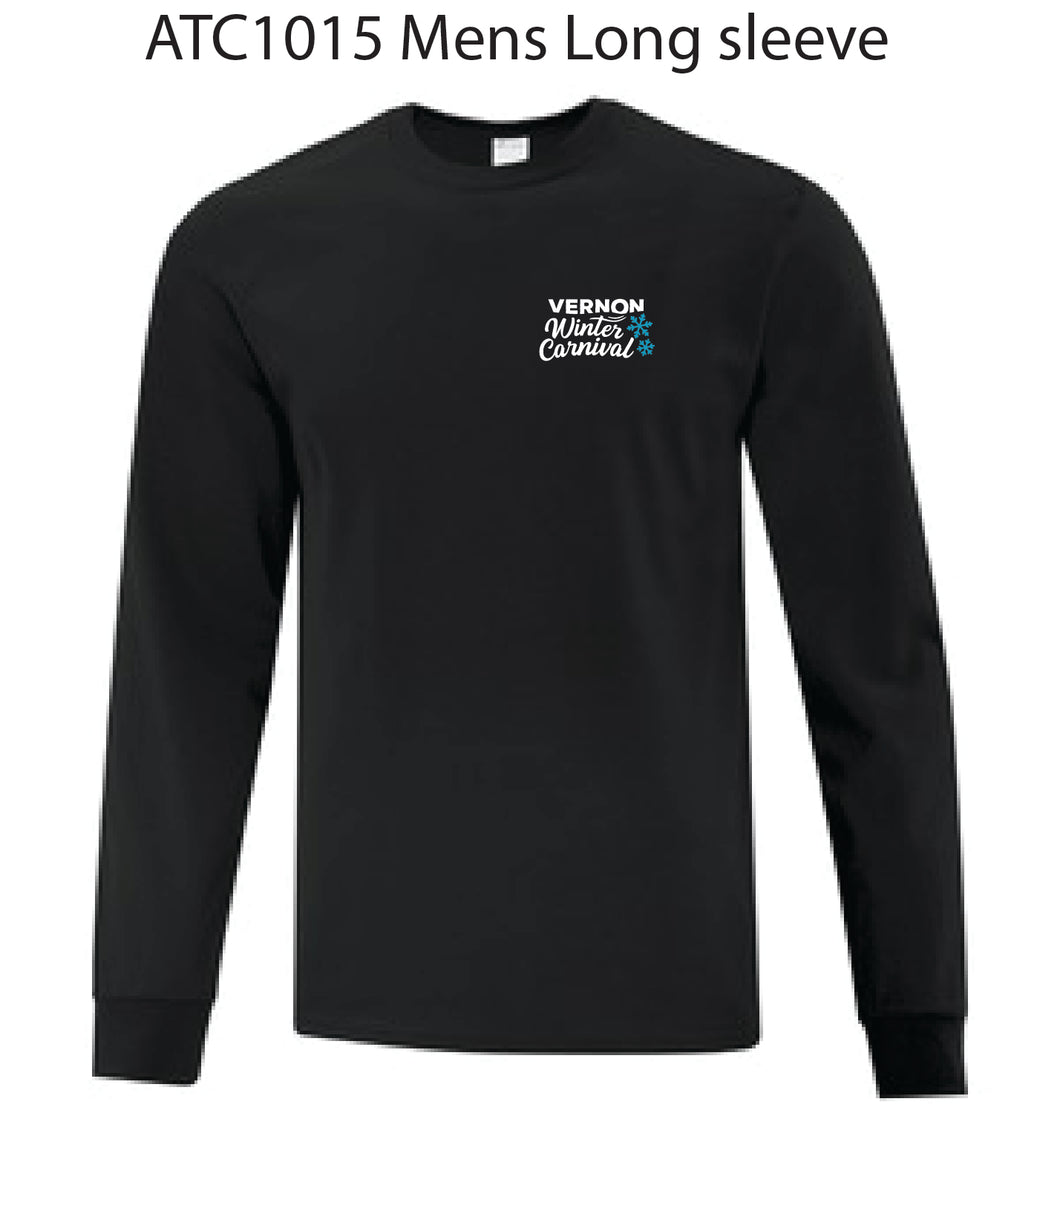 Men's Long Sleeve Active Wear with VWC logo